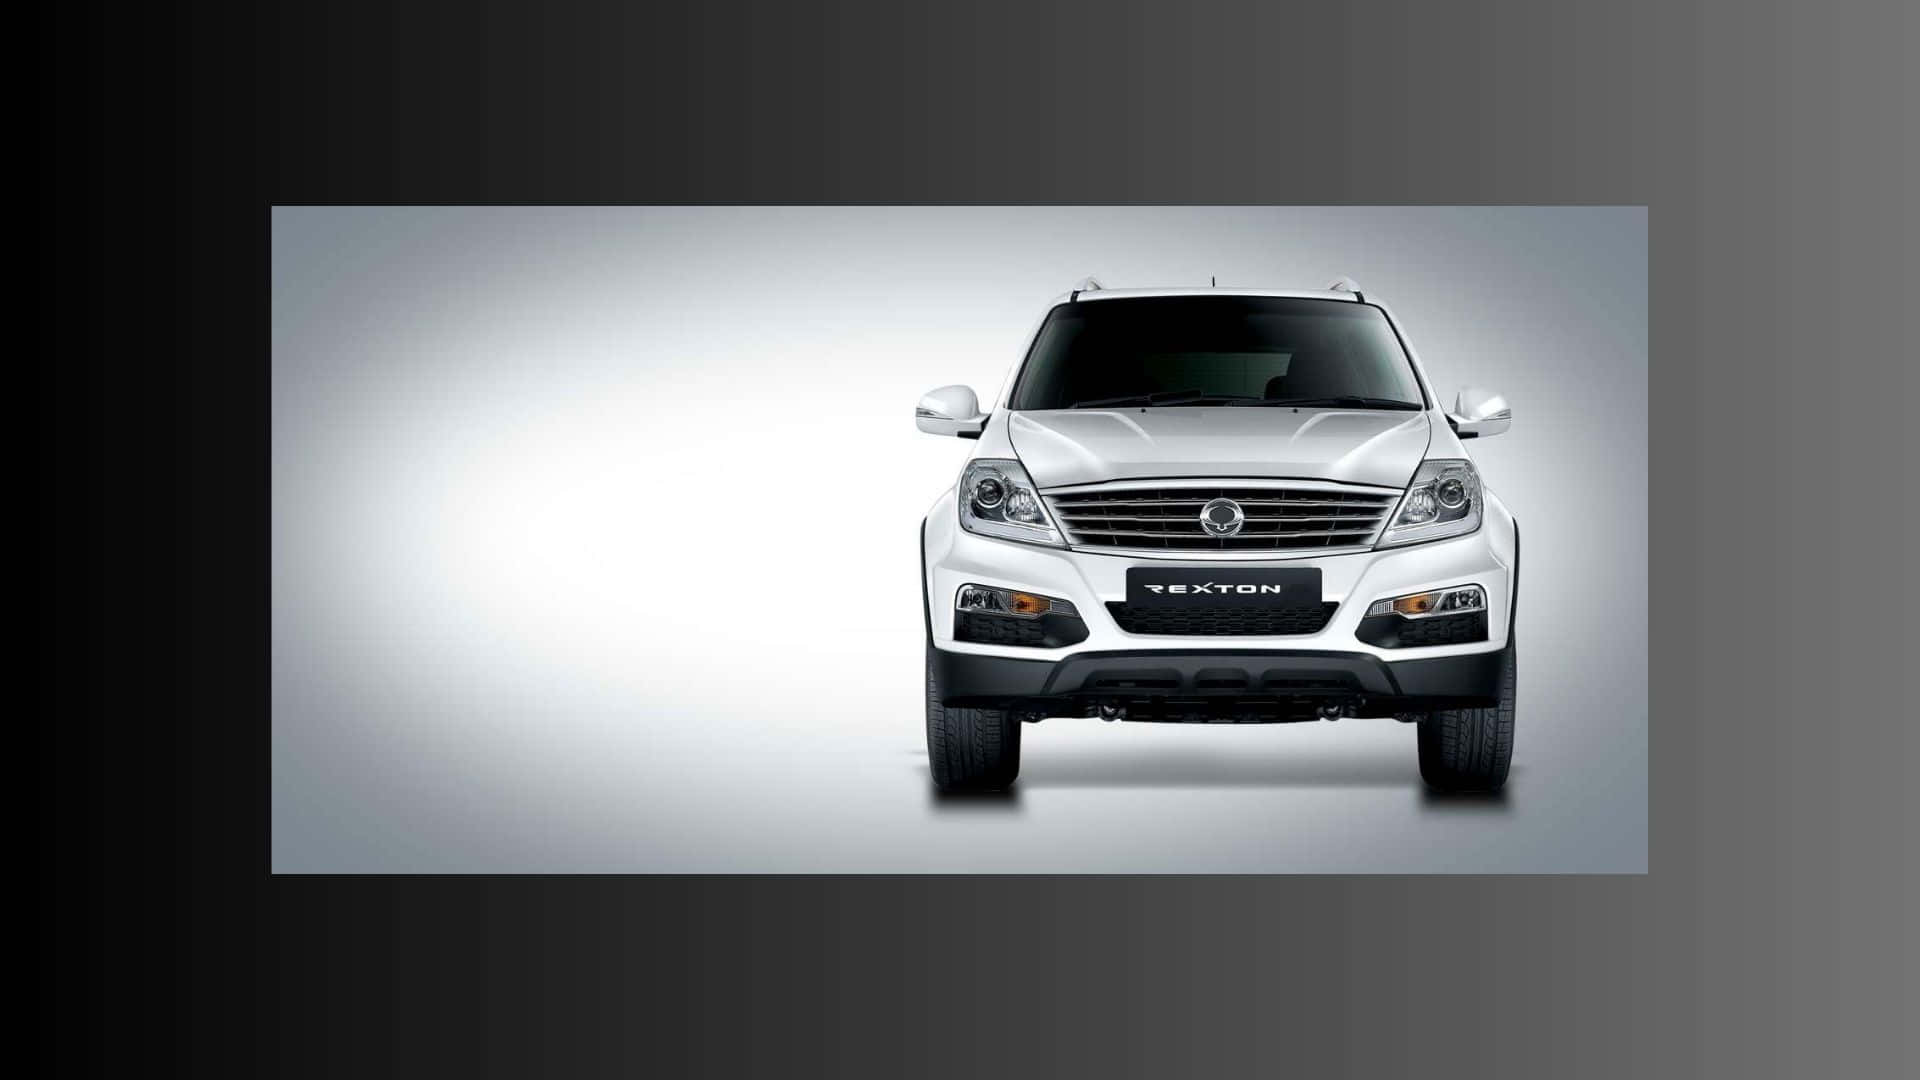 Sleek SsangYong SUV driving on a picturesque road Wallpaper